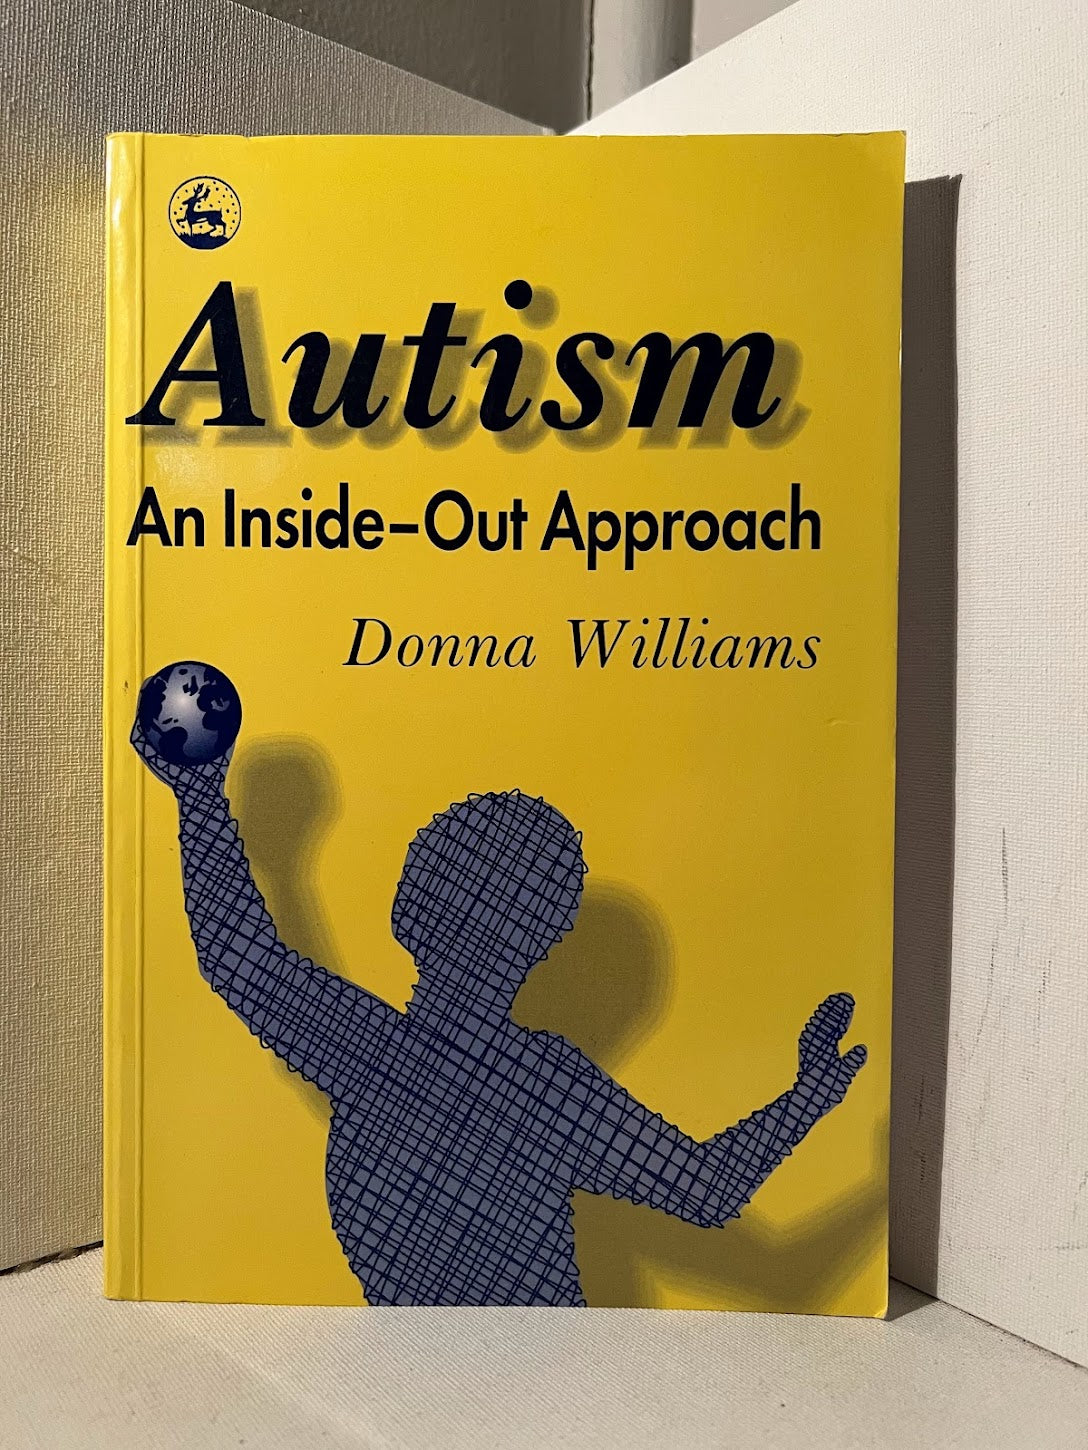 Autism: An Inside-Out Approach by Donna Williams